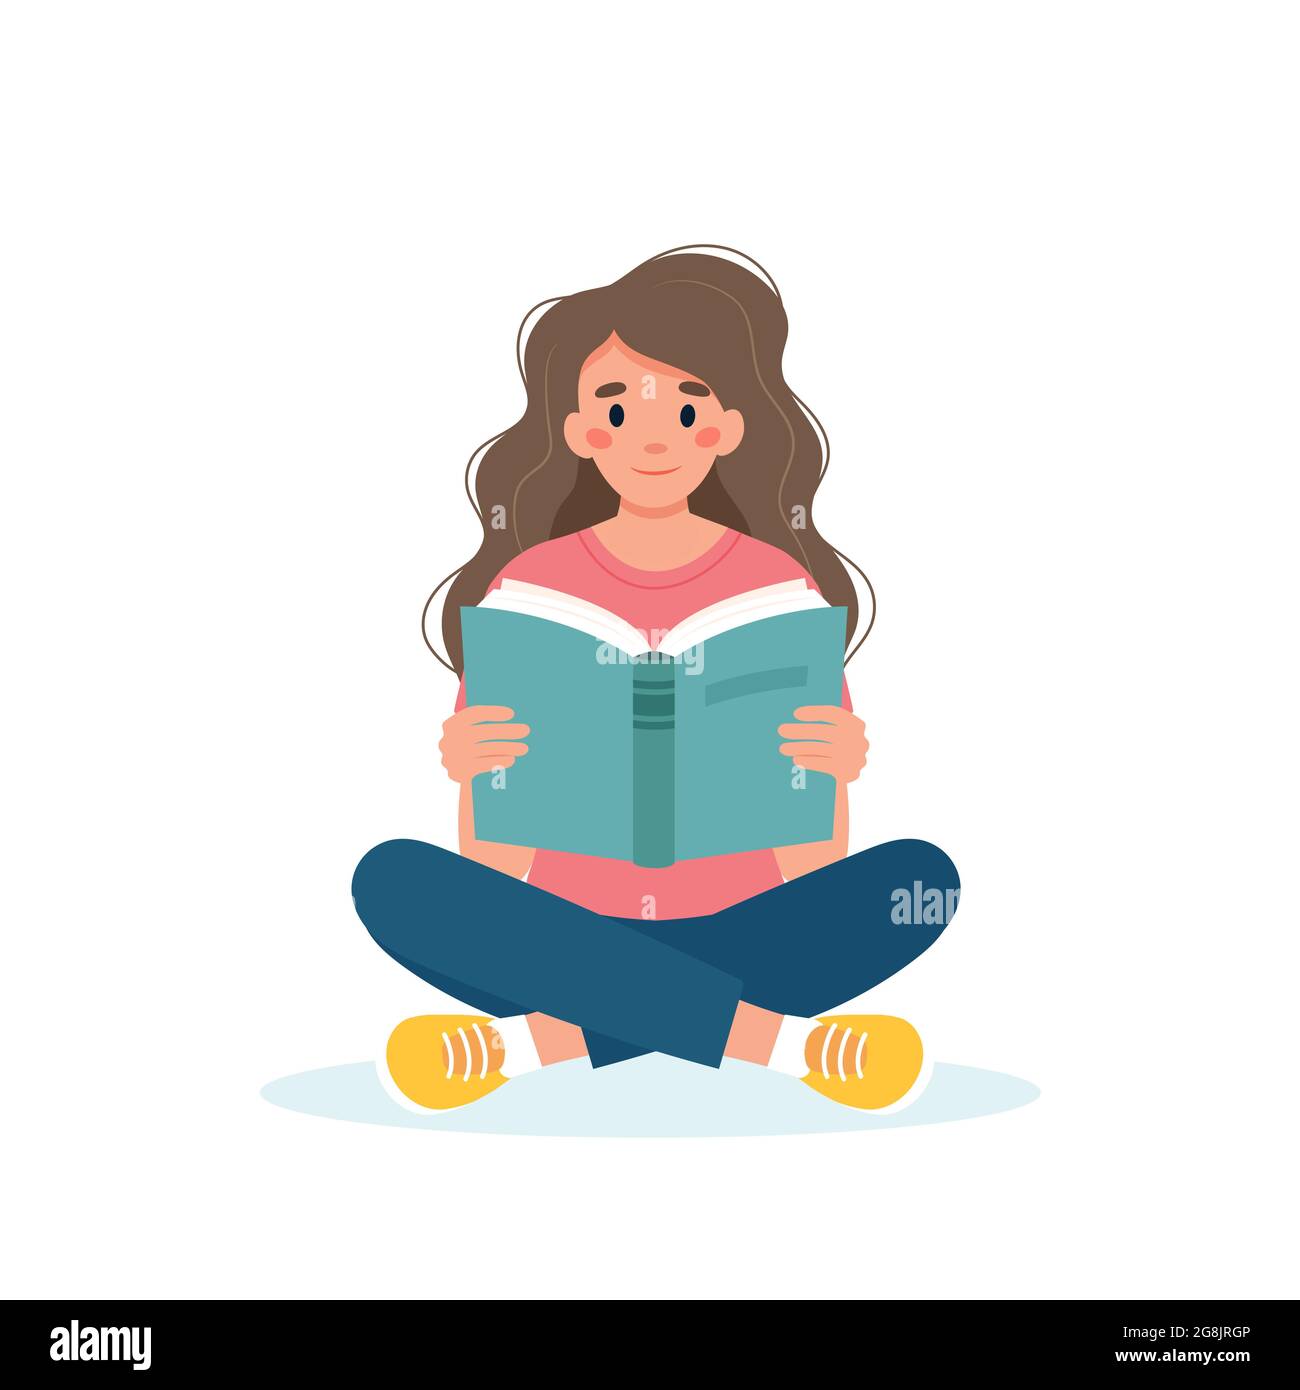 https://c8.alamy.com/comp/2G8JRGP/woman-reading-book-while-sitting-learning-and-literacy-day-concept-cute-vector-illustration-in-flat-cartoon-style-2G8JRGP.jpg